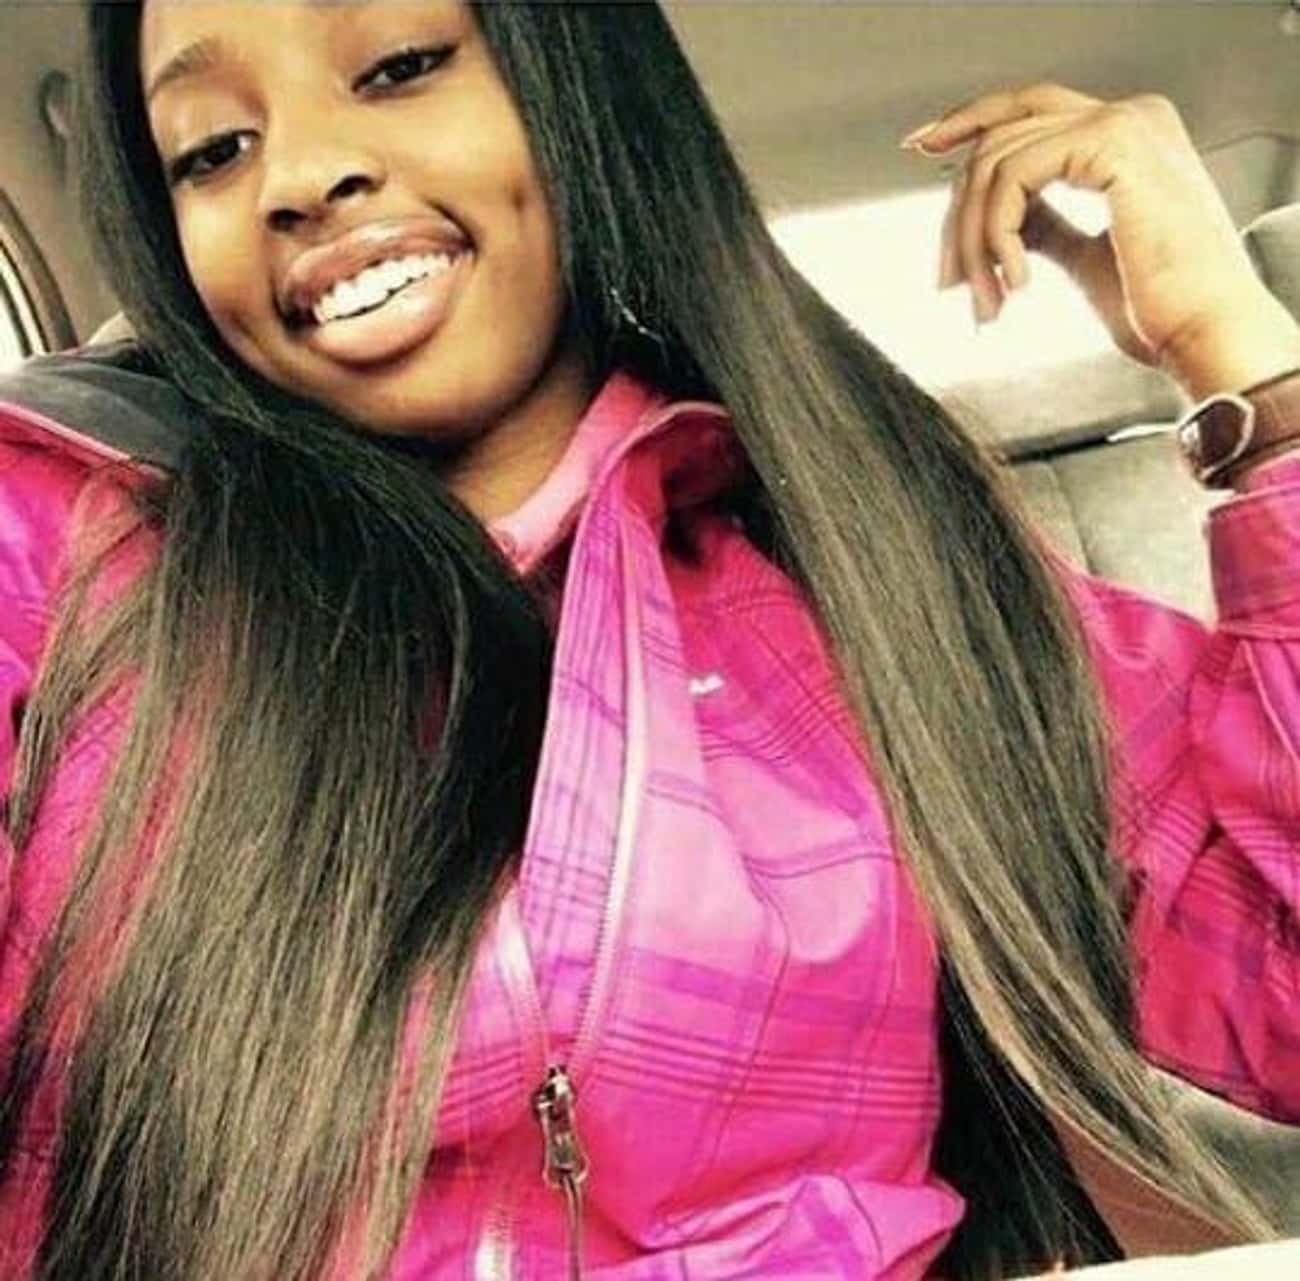 Kenneka Jenkins Was Attending A Party At A Hotel When Her Friends Lost Track Of Her